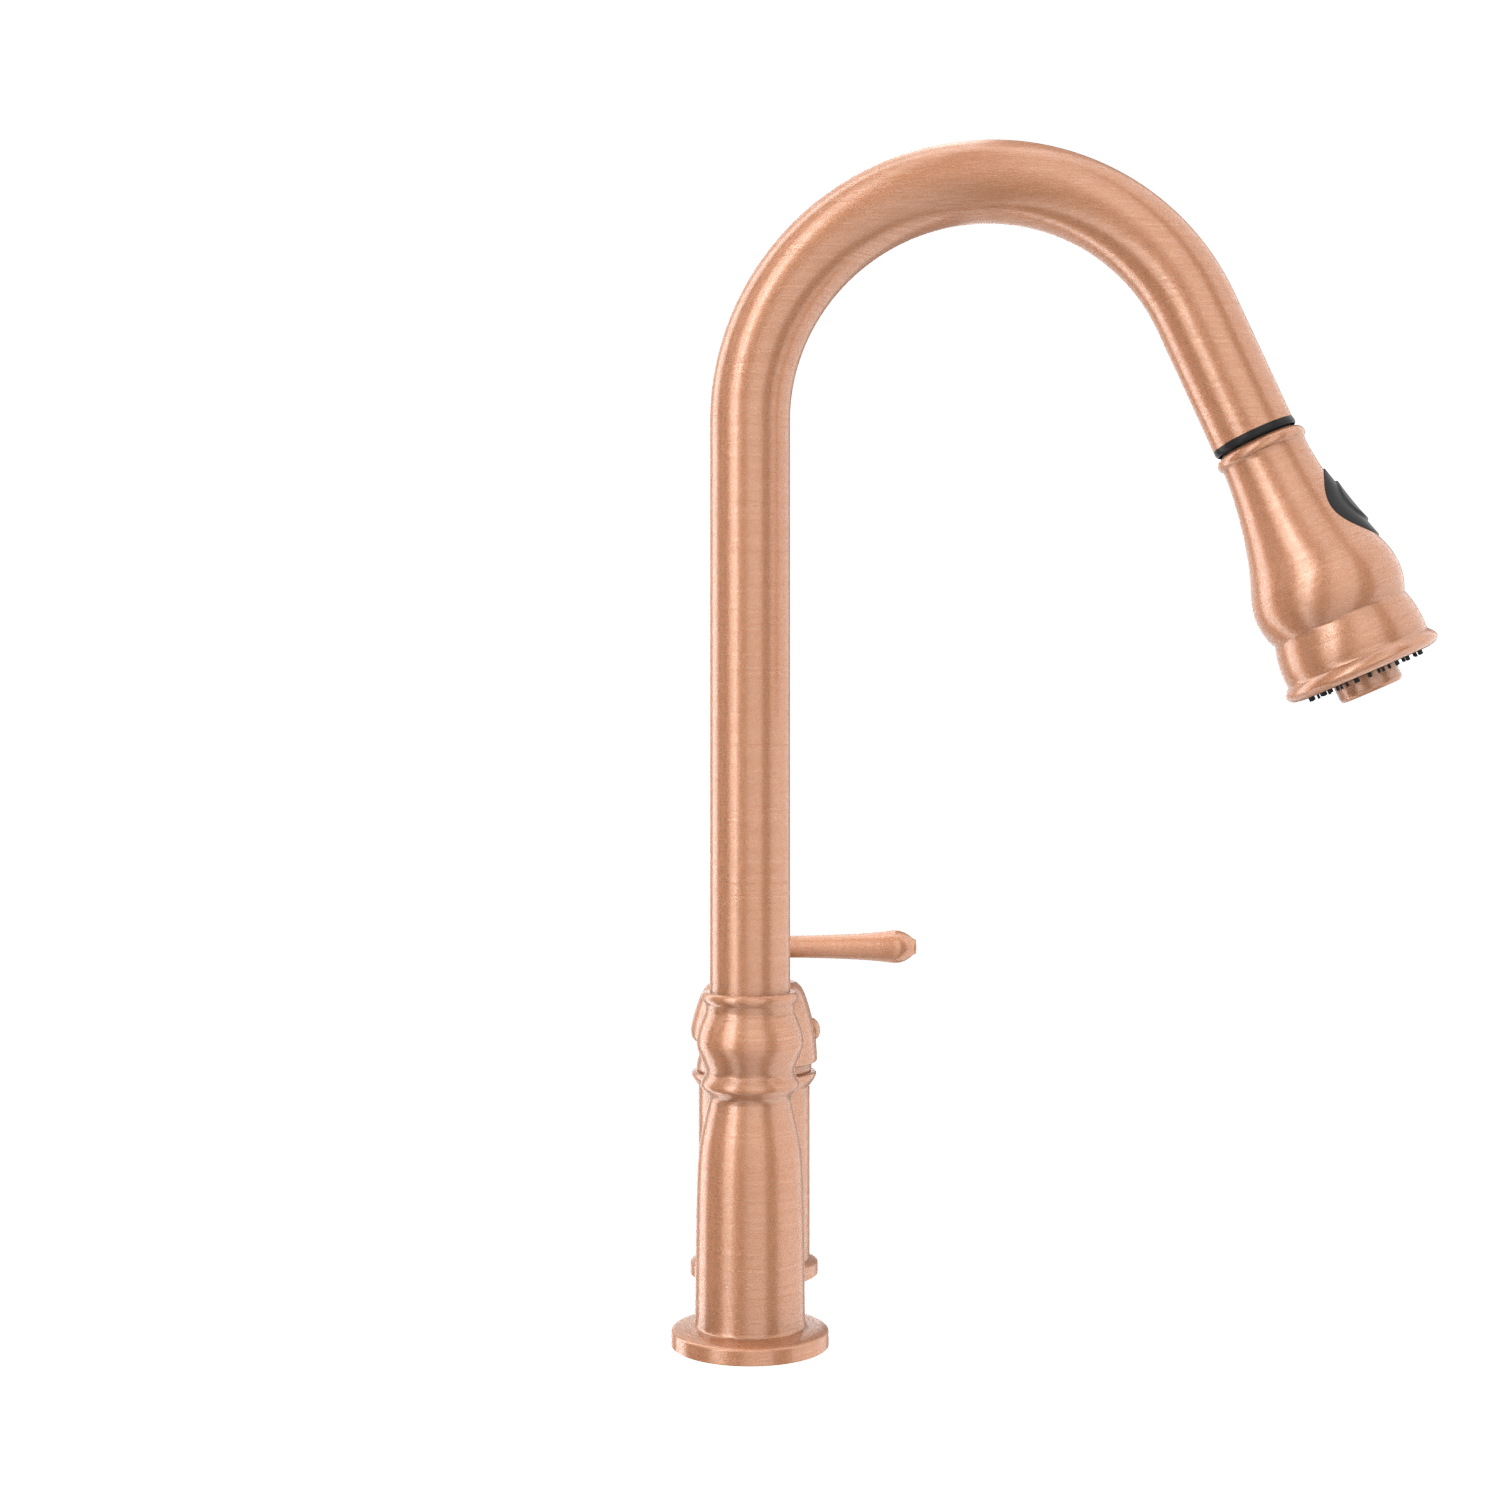 Copper Kitchen Faucet with in-Deck Handle and Soap Dispenser, Single Handle Solid Brass High Arc Pull Down Sprayer Head Kitchen Sink Faucet